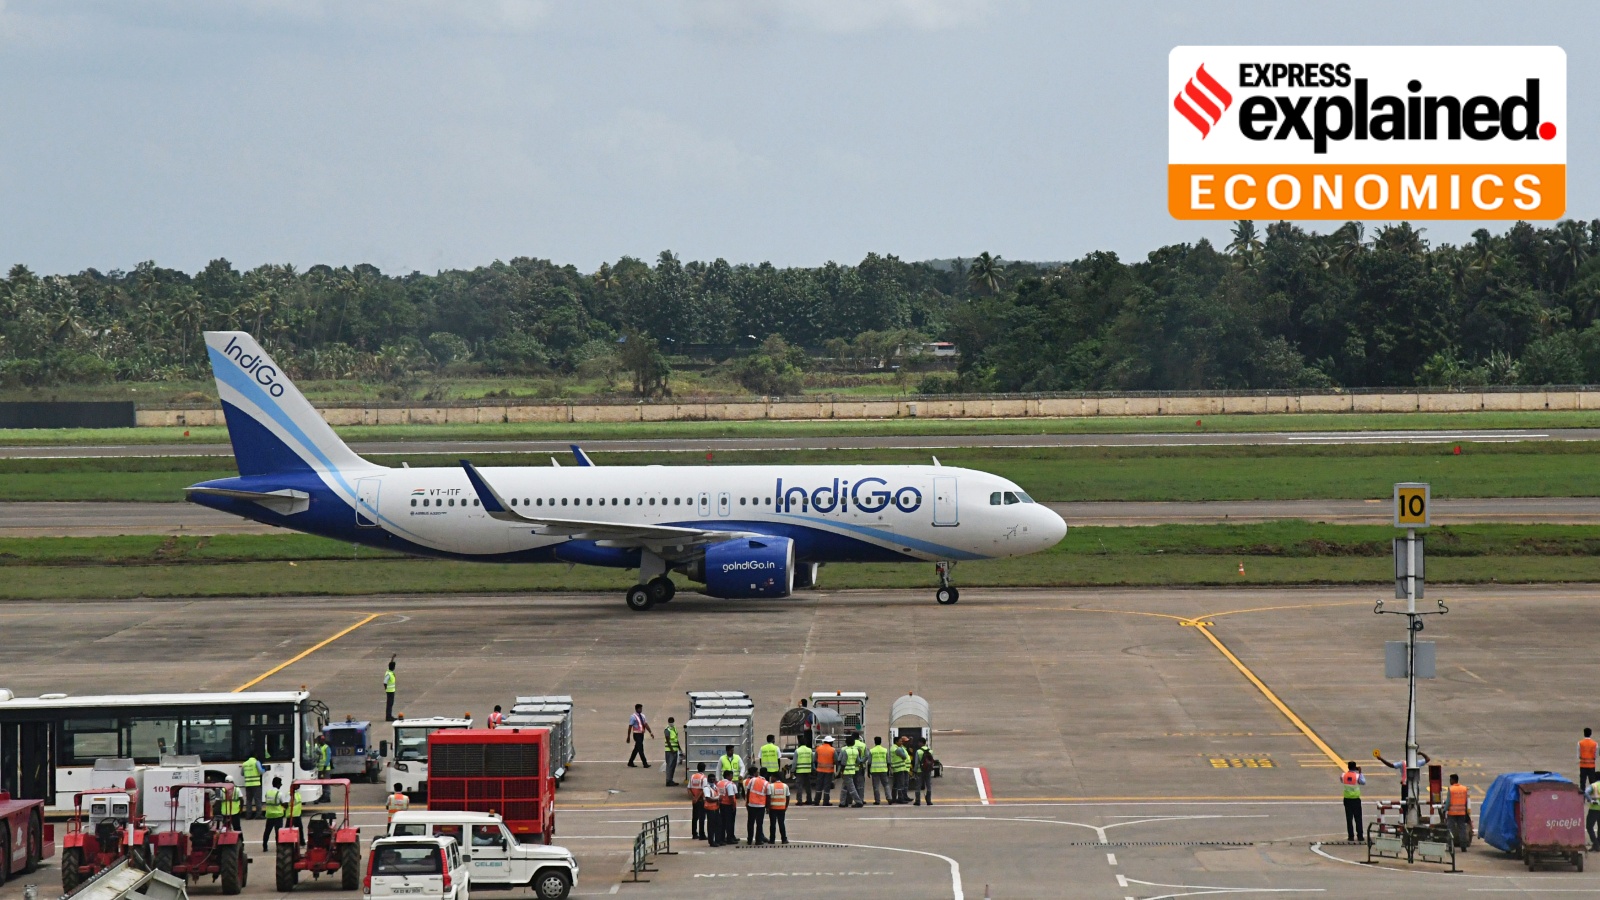 android, indigo’s wide-body aircraft order: what makes long-haul, low-cost air travel a tough nut to crack?